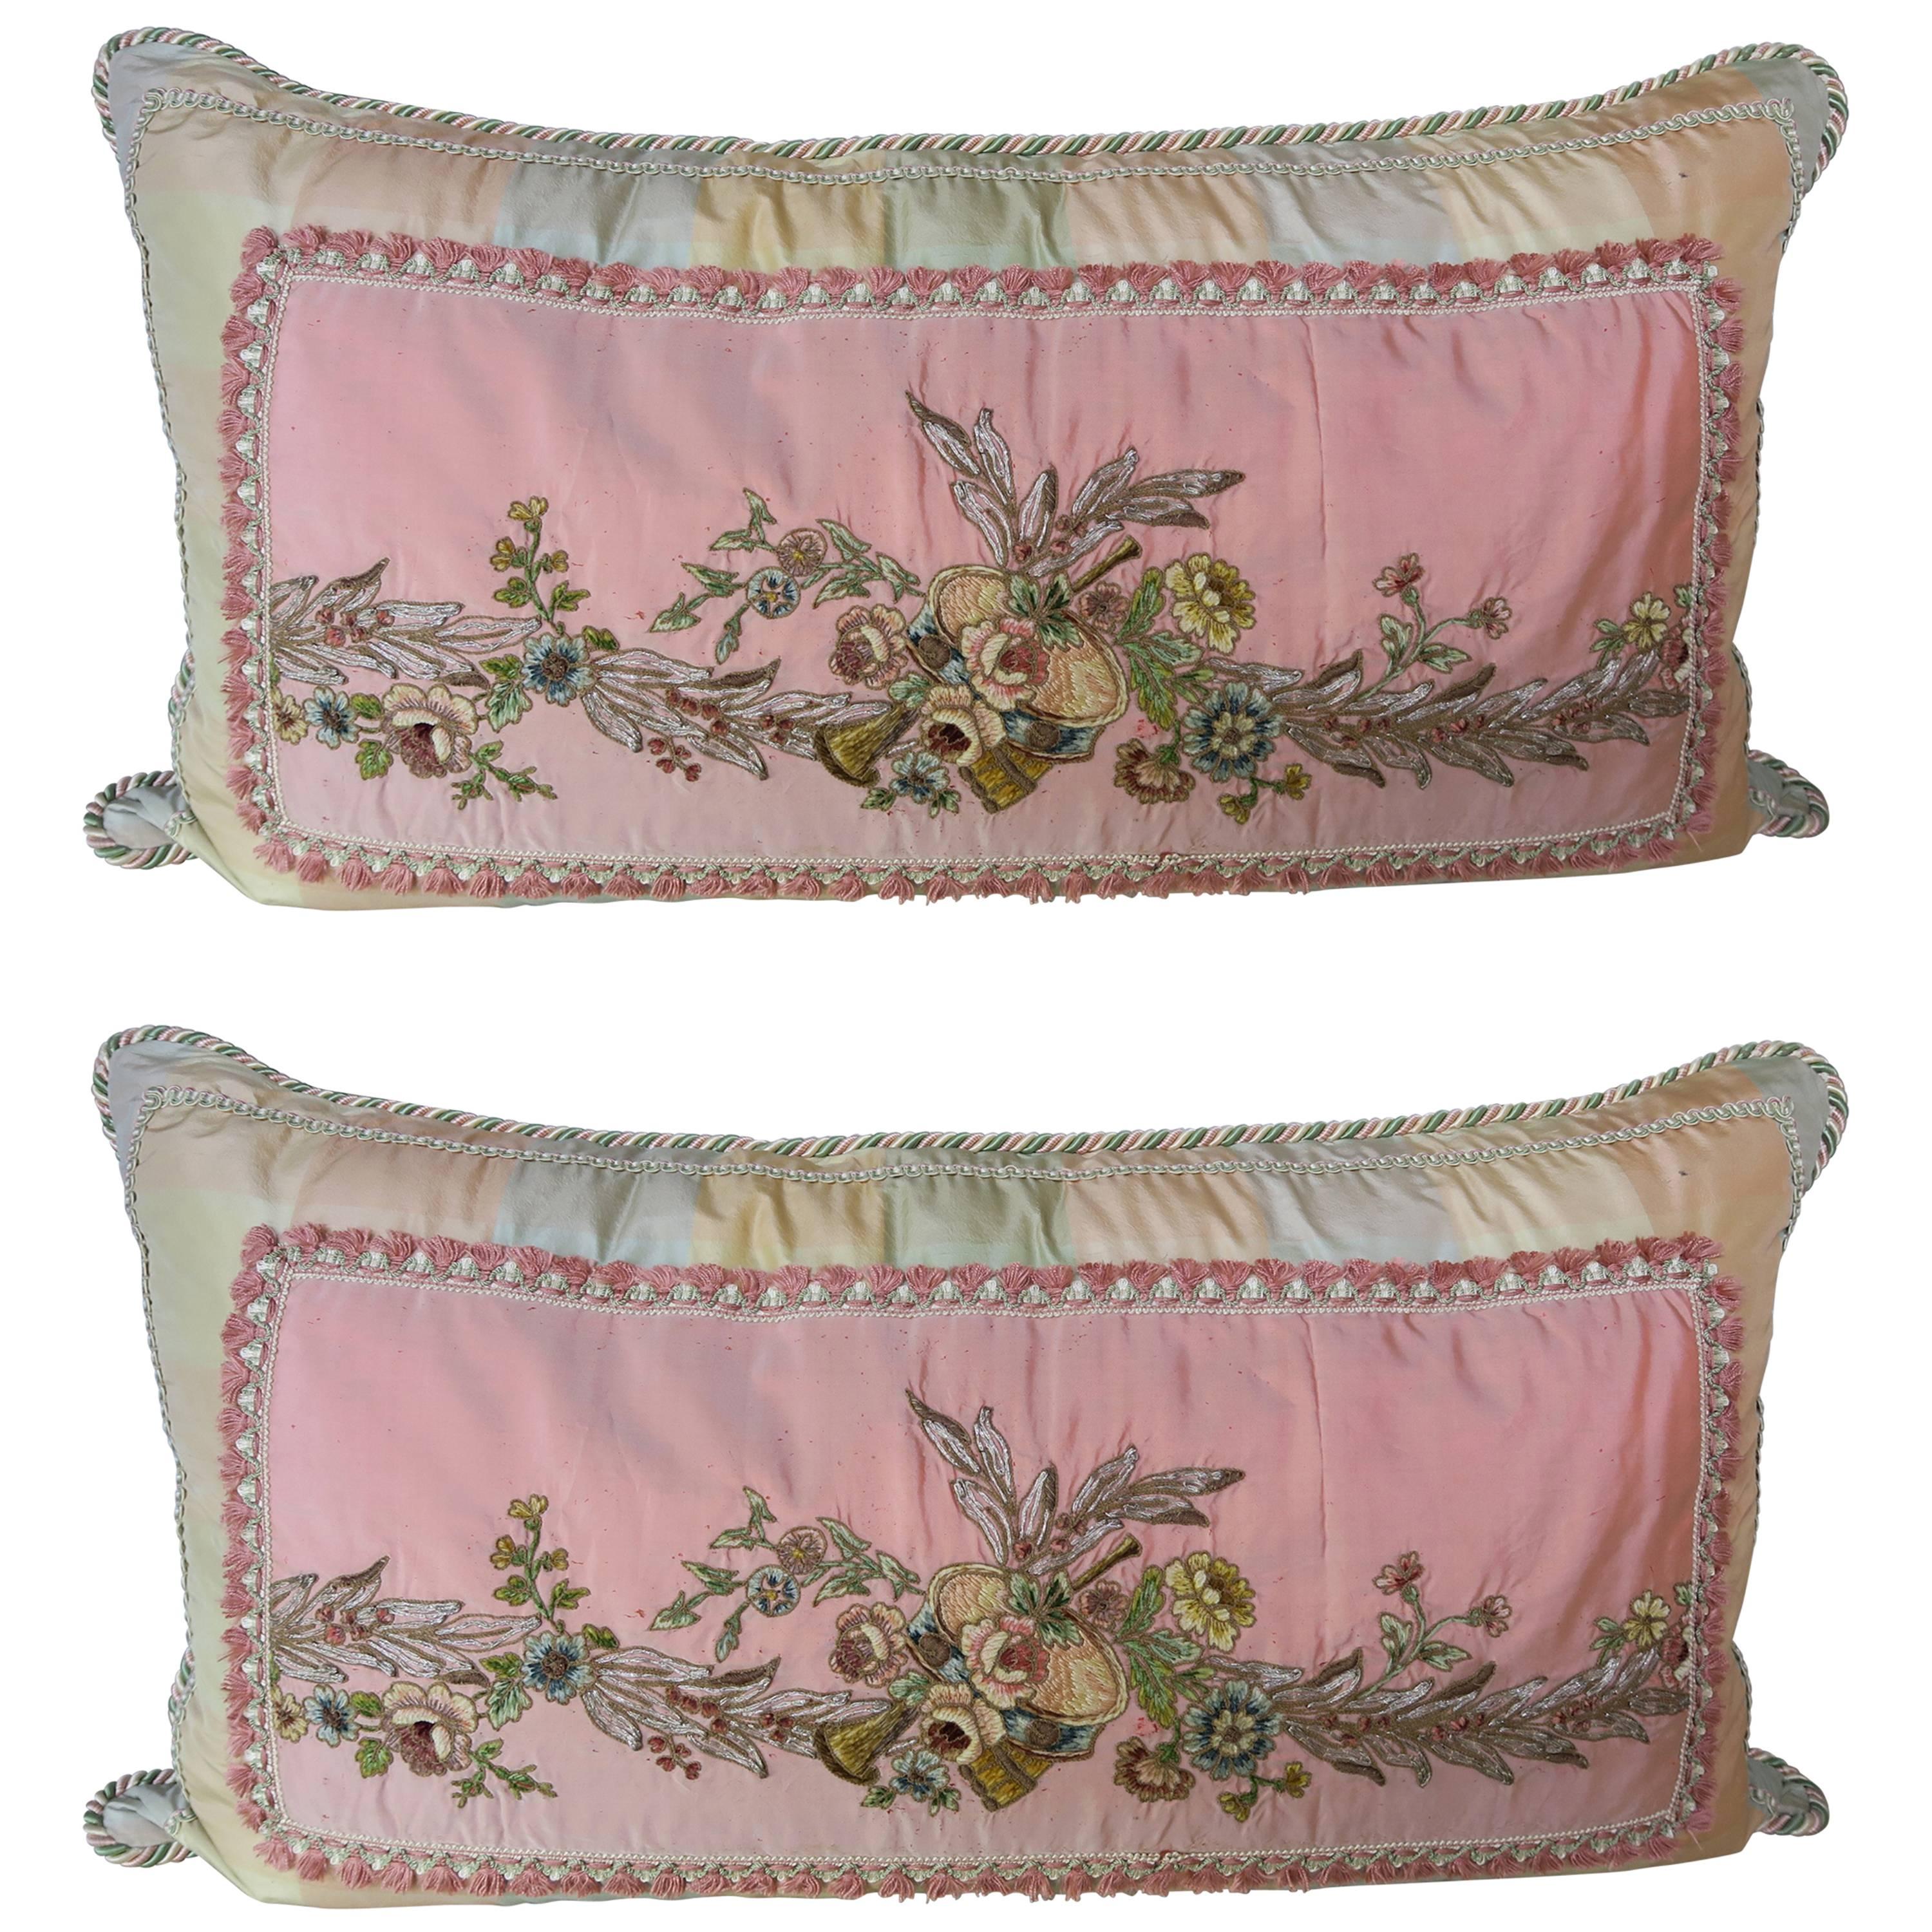 Pair of Antique Metallic and Chenille Embroidered Pillows